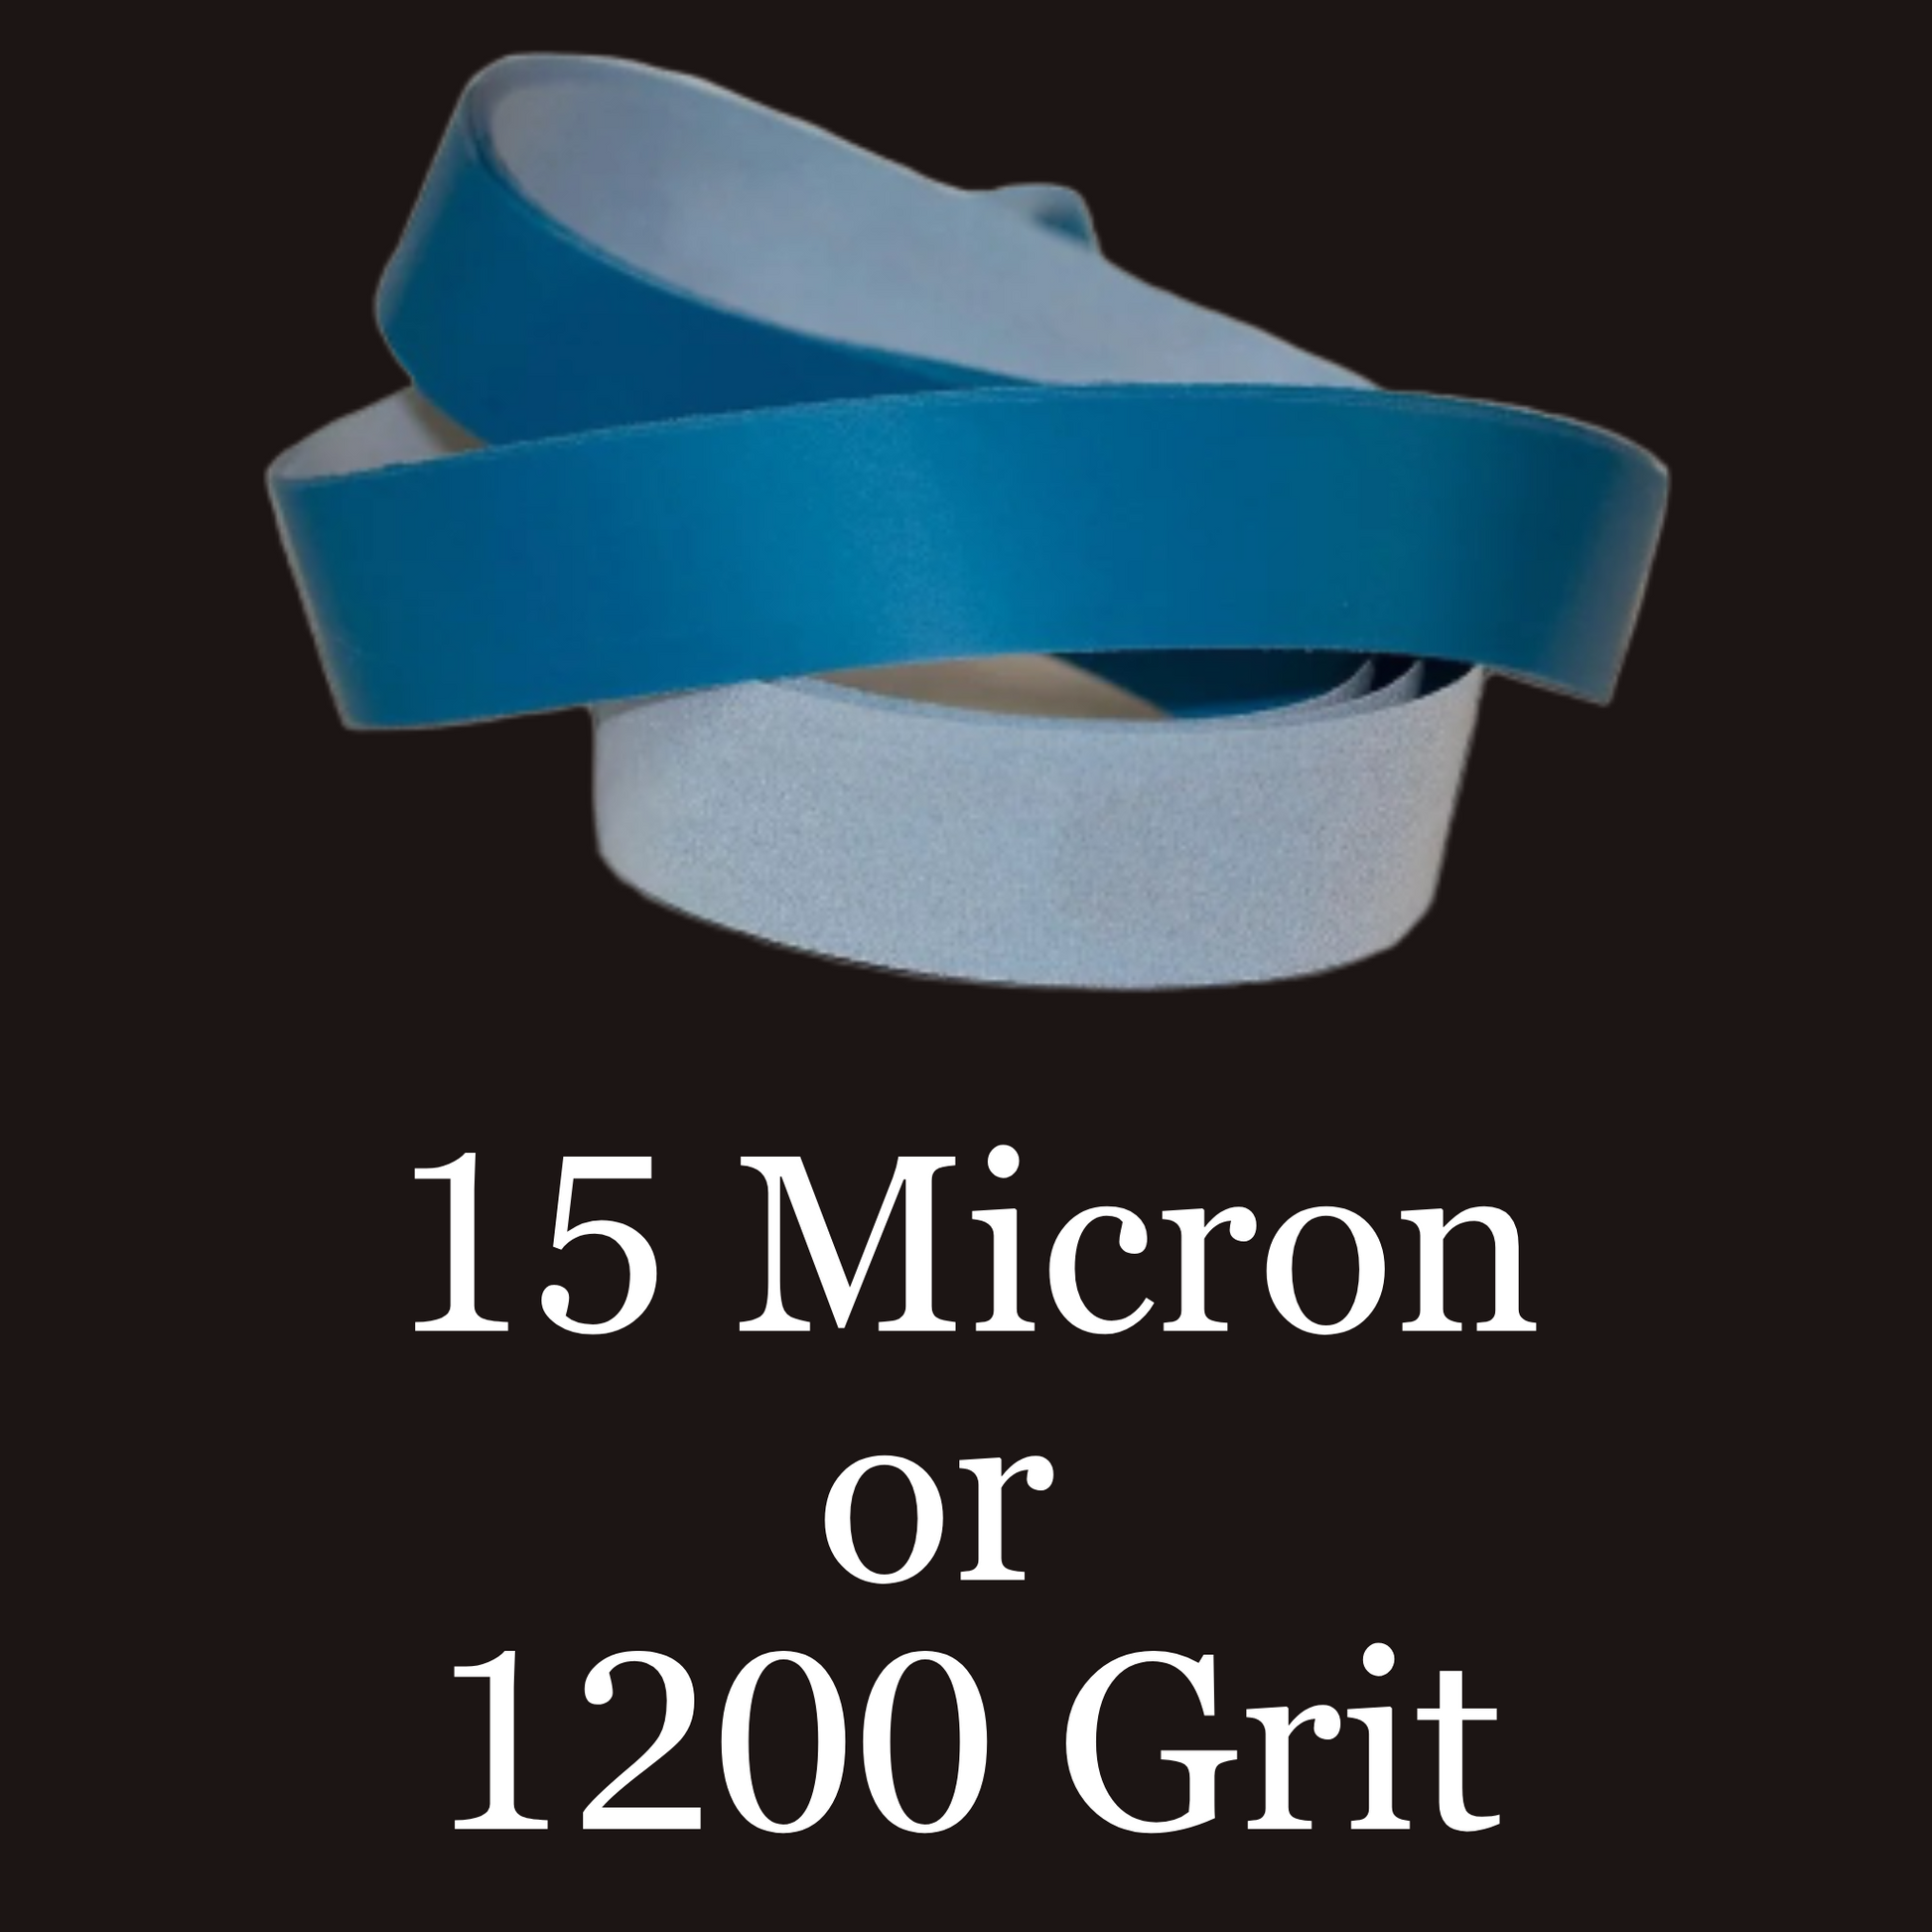 2” x 72” Film Micron Graded Finishing Belts 15 Micron or 1200 Grit